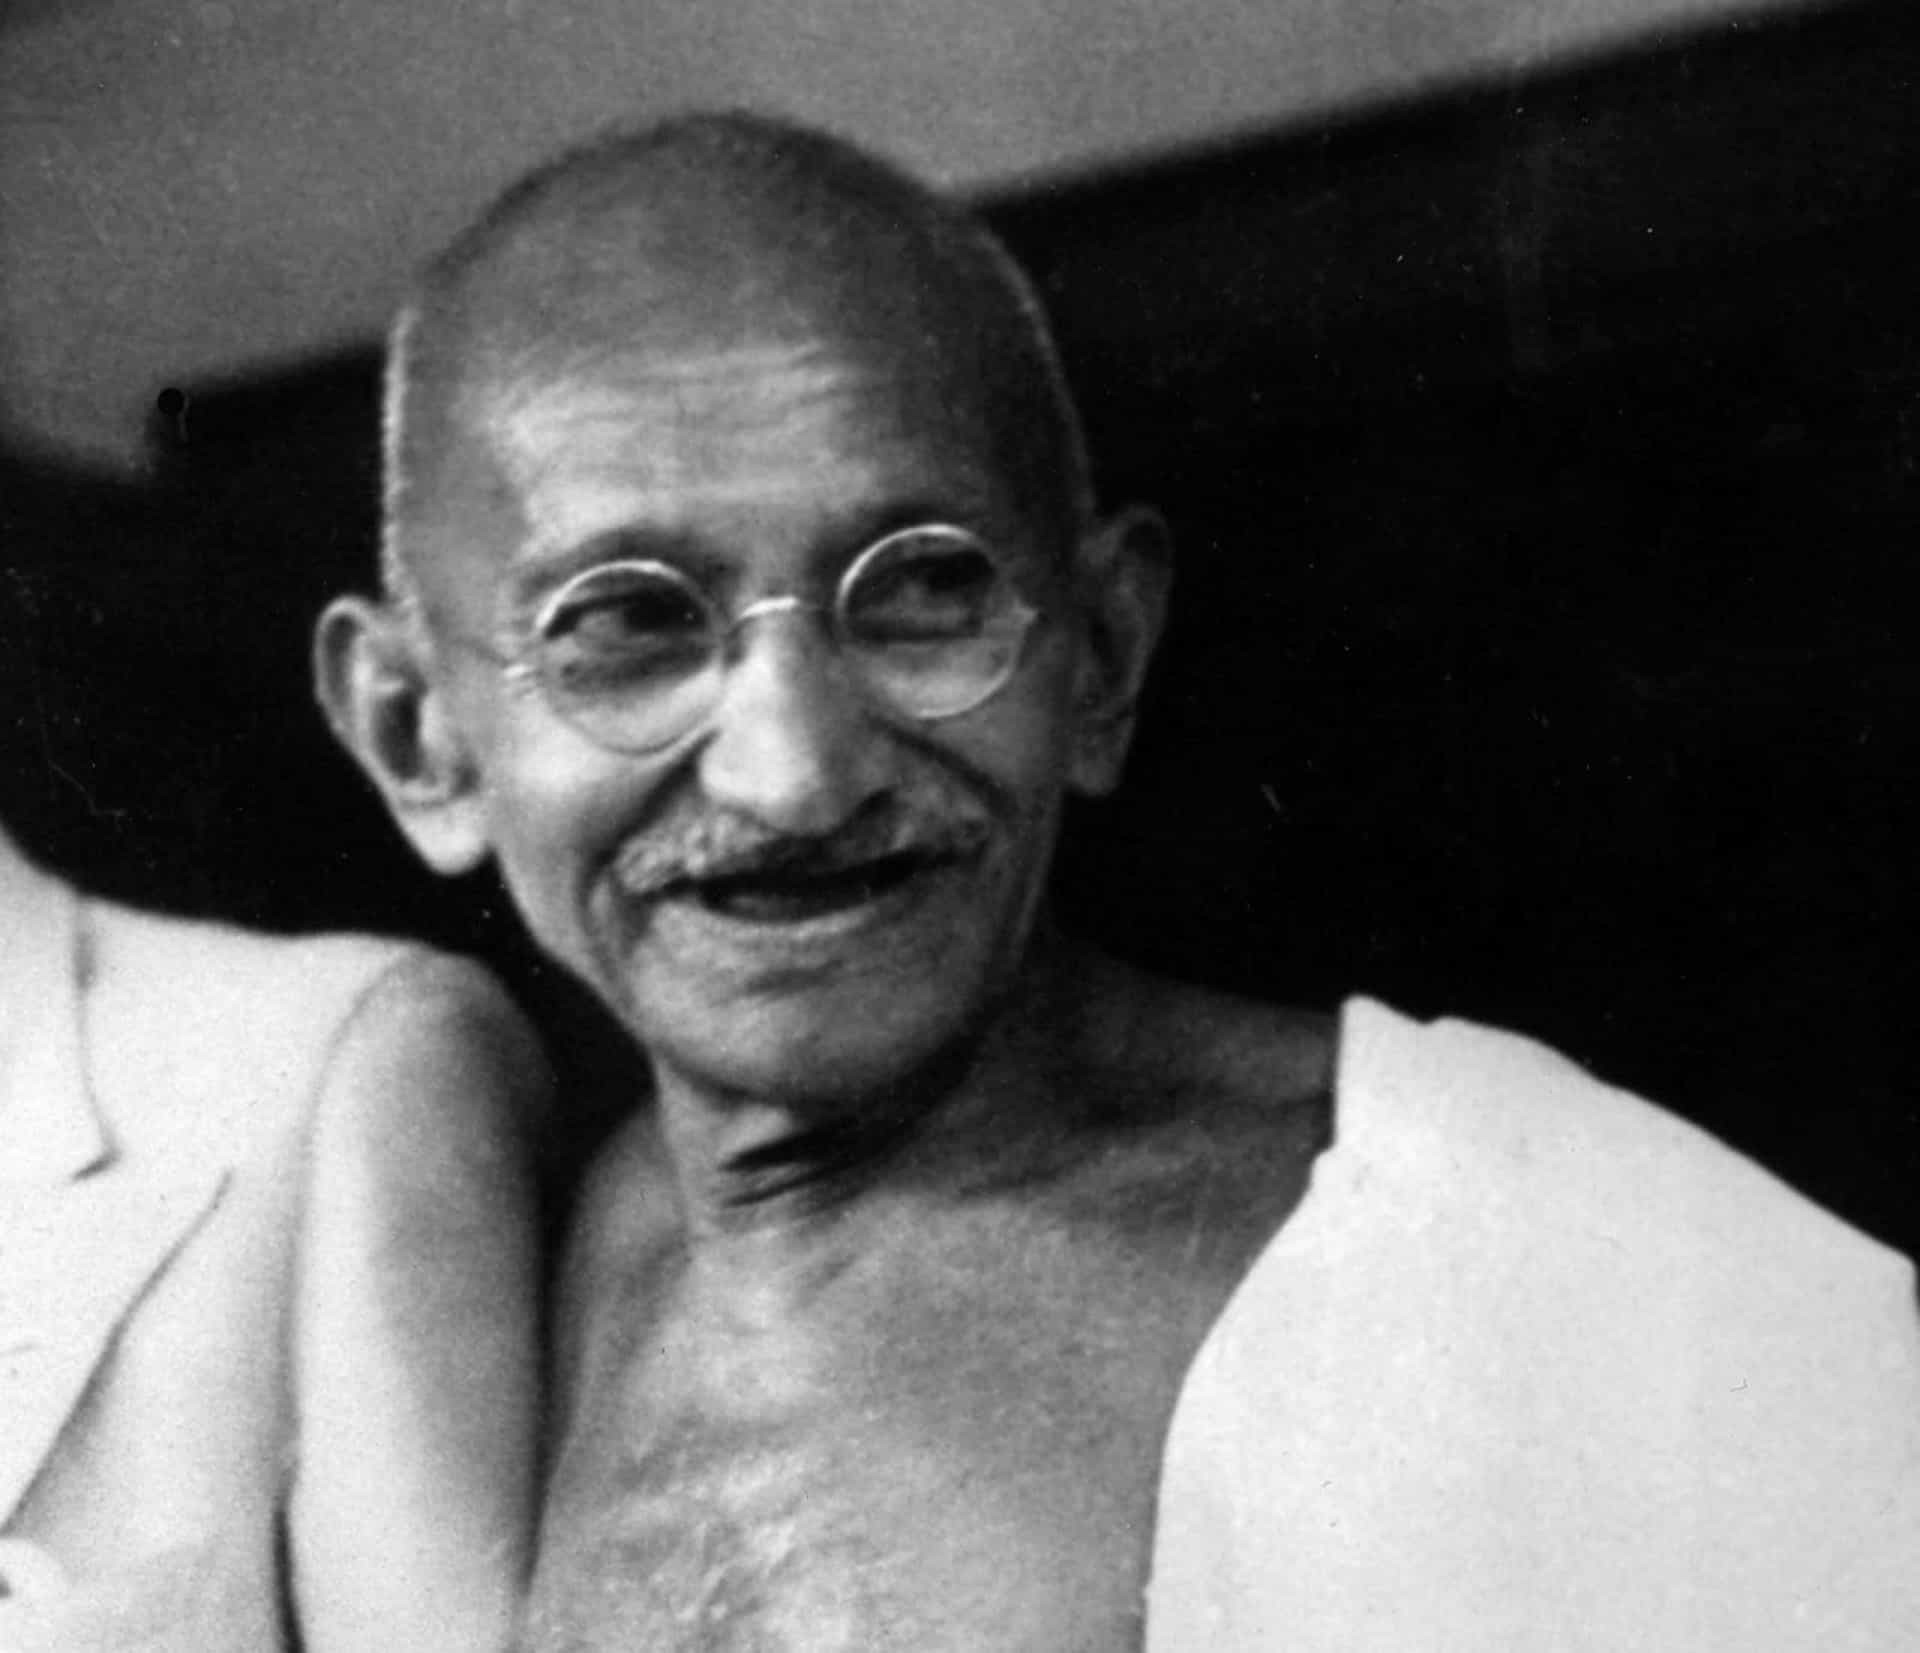 <p>Born October 2, 1869, Mahatma Gandhi was an Indian lawyer, politician, social activist, and writer who became the leader of the nationalist movement against the British rule of India. Employing a policy of nonviolent resistance, he successfully campaigned for the country's independence. In turn, he inspired movements for civil rights and freedom across the world. He lived to see India granted the right to govern itself. He also witnessed the partition of the country, an event that led indirectly to his <a href="https://www.starsinsider.com/lifestyle/271161/political-figures-who-survived-assassination-attempts" rel="noopener">assassination</a> on January 30, 1948. </p> <p>Click through the gallery and relive the key moments that shaped the life and work of the man they called the Mahatma, or "Great Soul." </p><p>You may also like:<a href="https://www.starsinsider.com/n/220053?utm_source=msn.com&utm_medium=display&utm_campaign=referral_description&utm_content=447666v5en-us"> Unprofessional stars involved in spats at work</a></p>